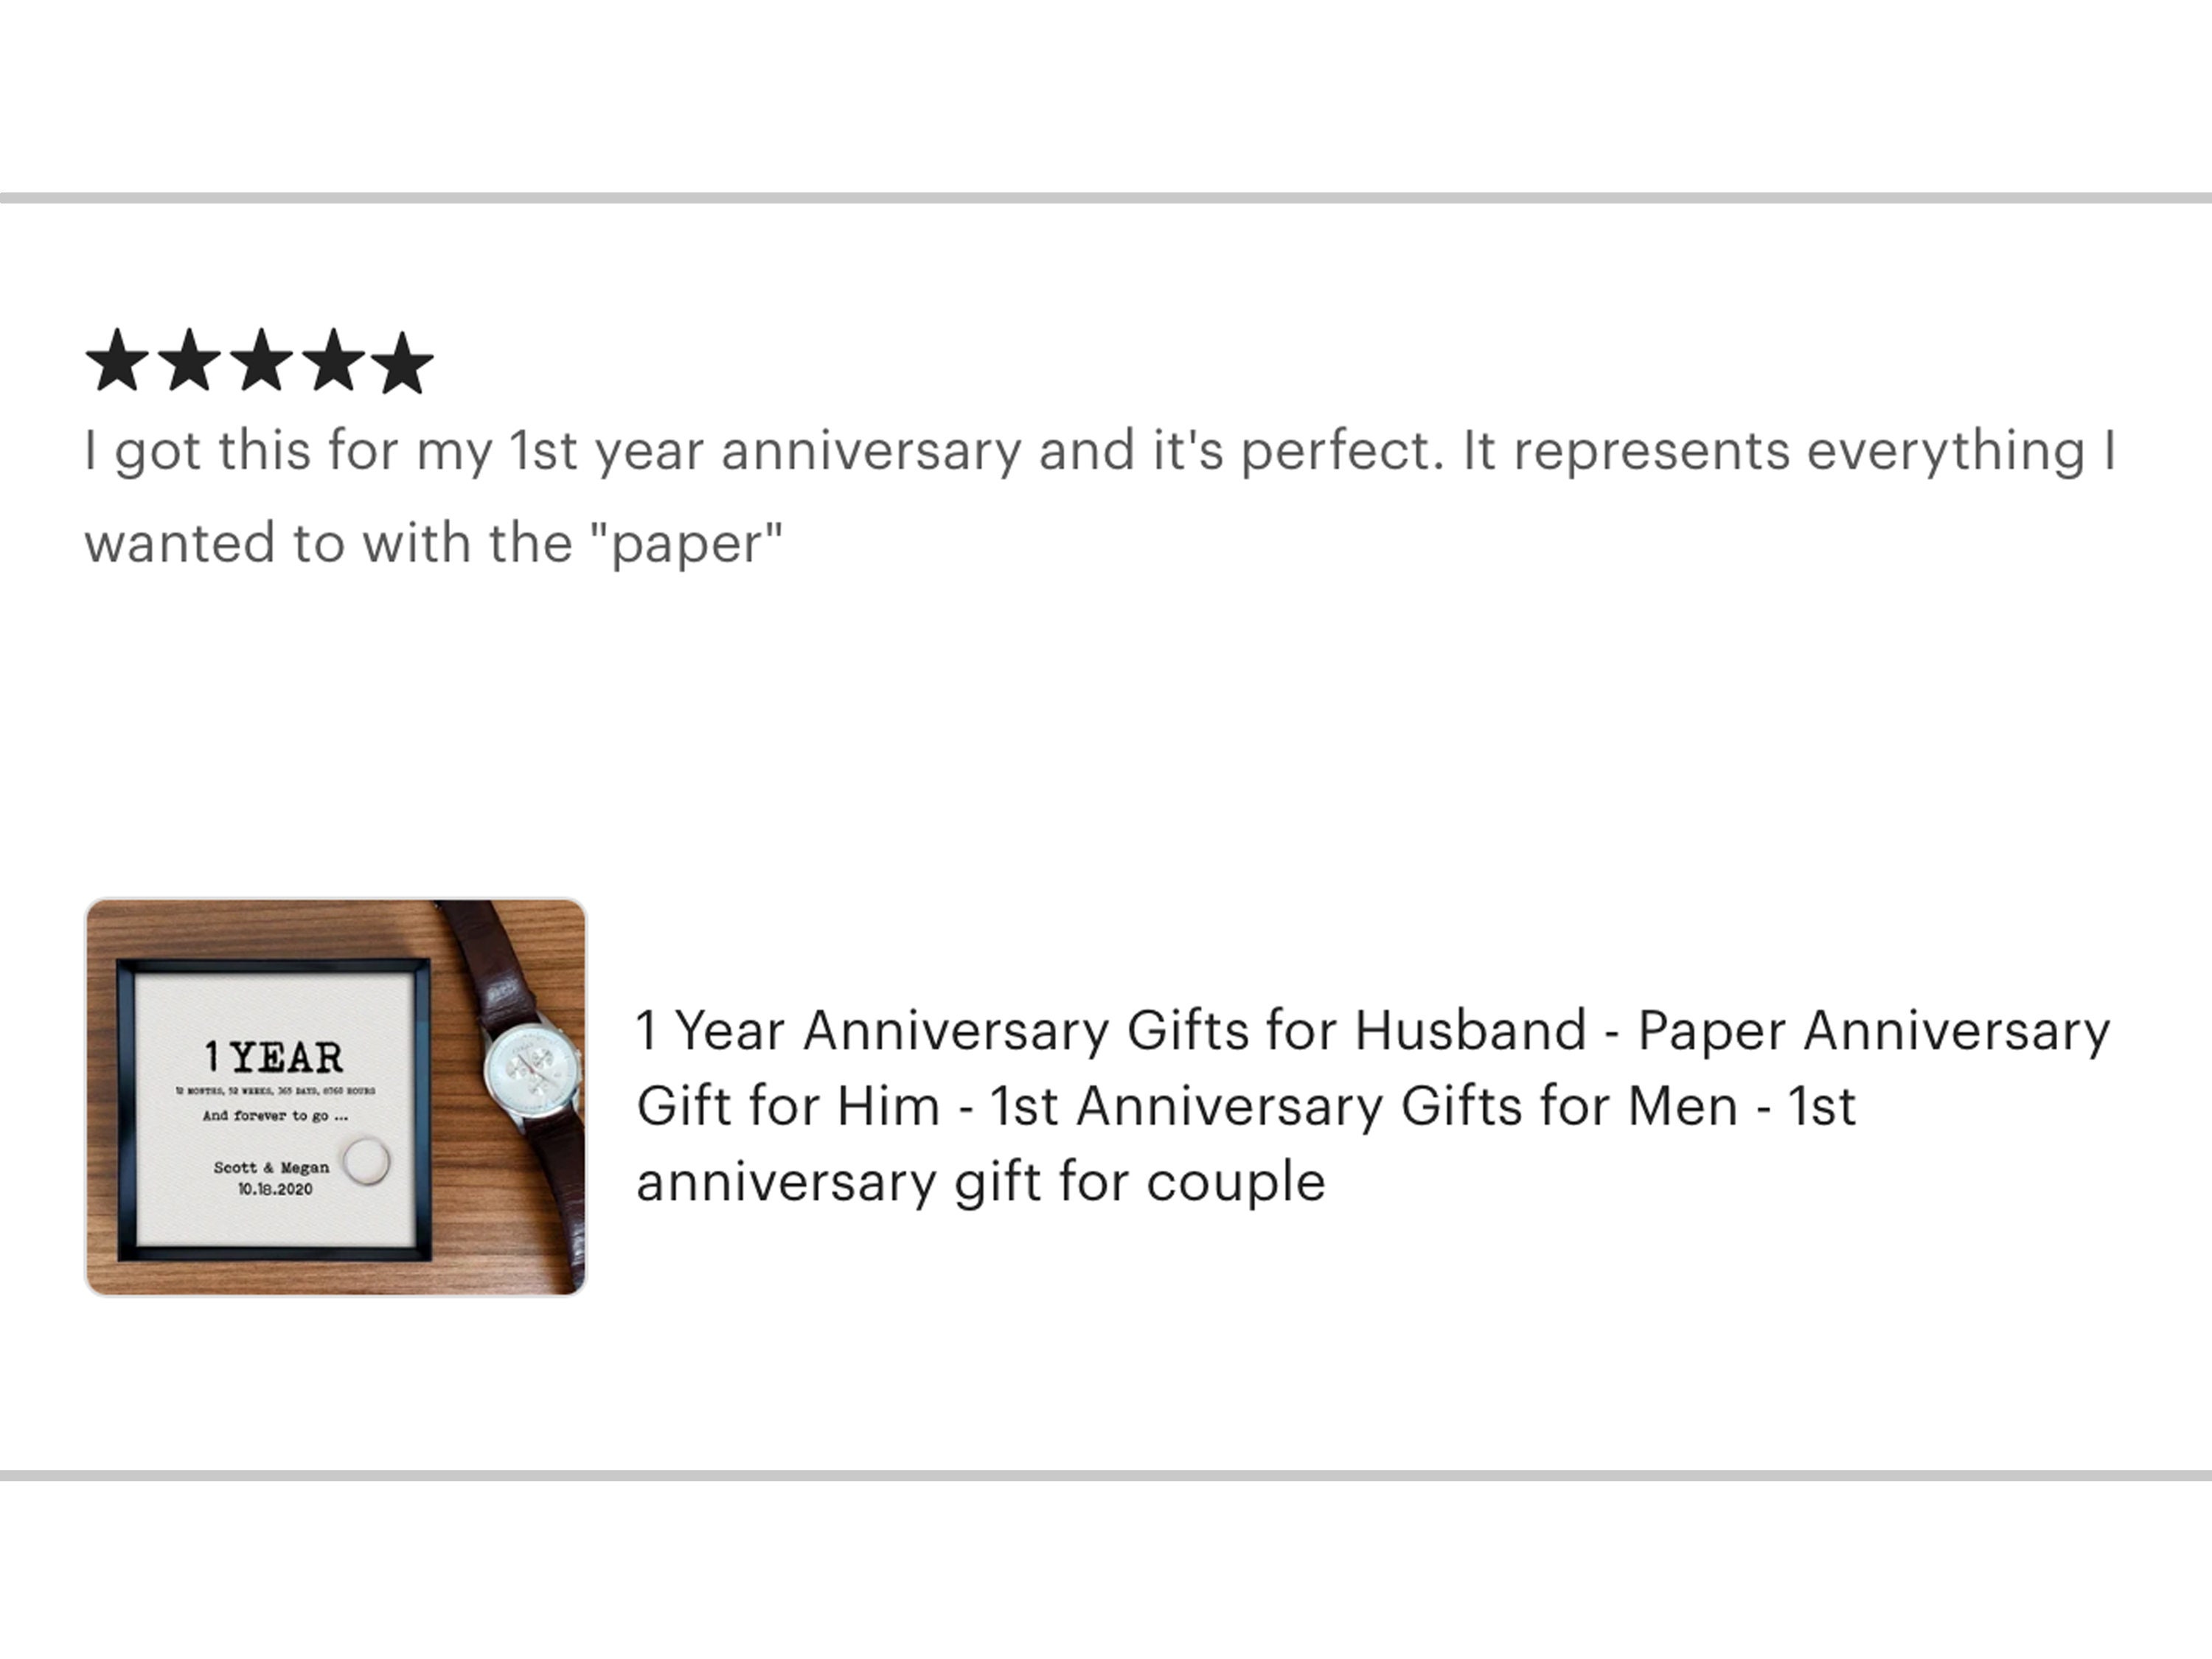 One Year Anniversary Gift for Him 1st Anniversary Gifts for Men 1